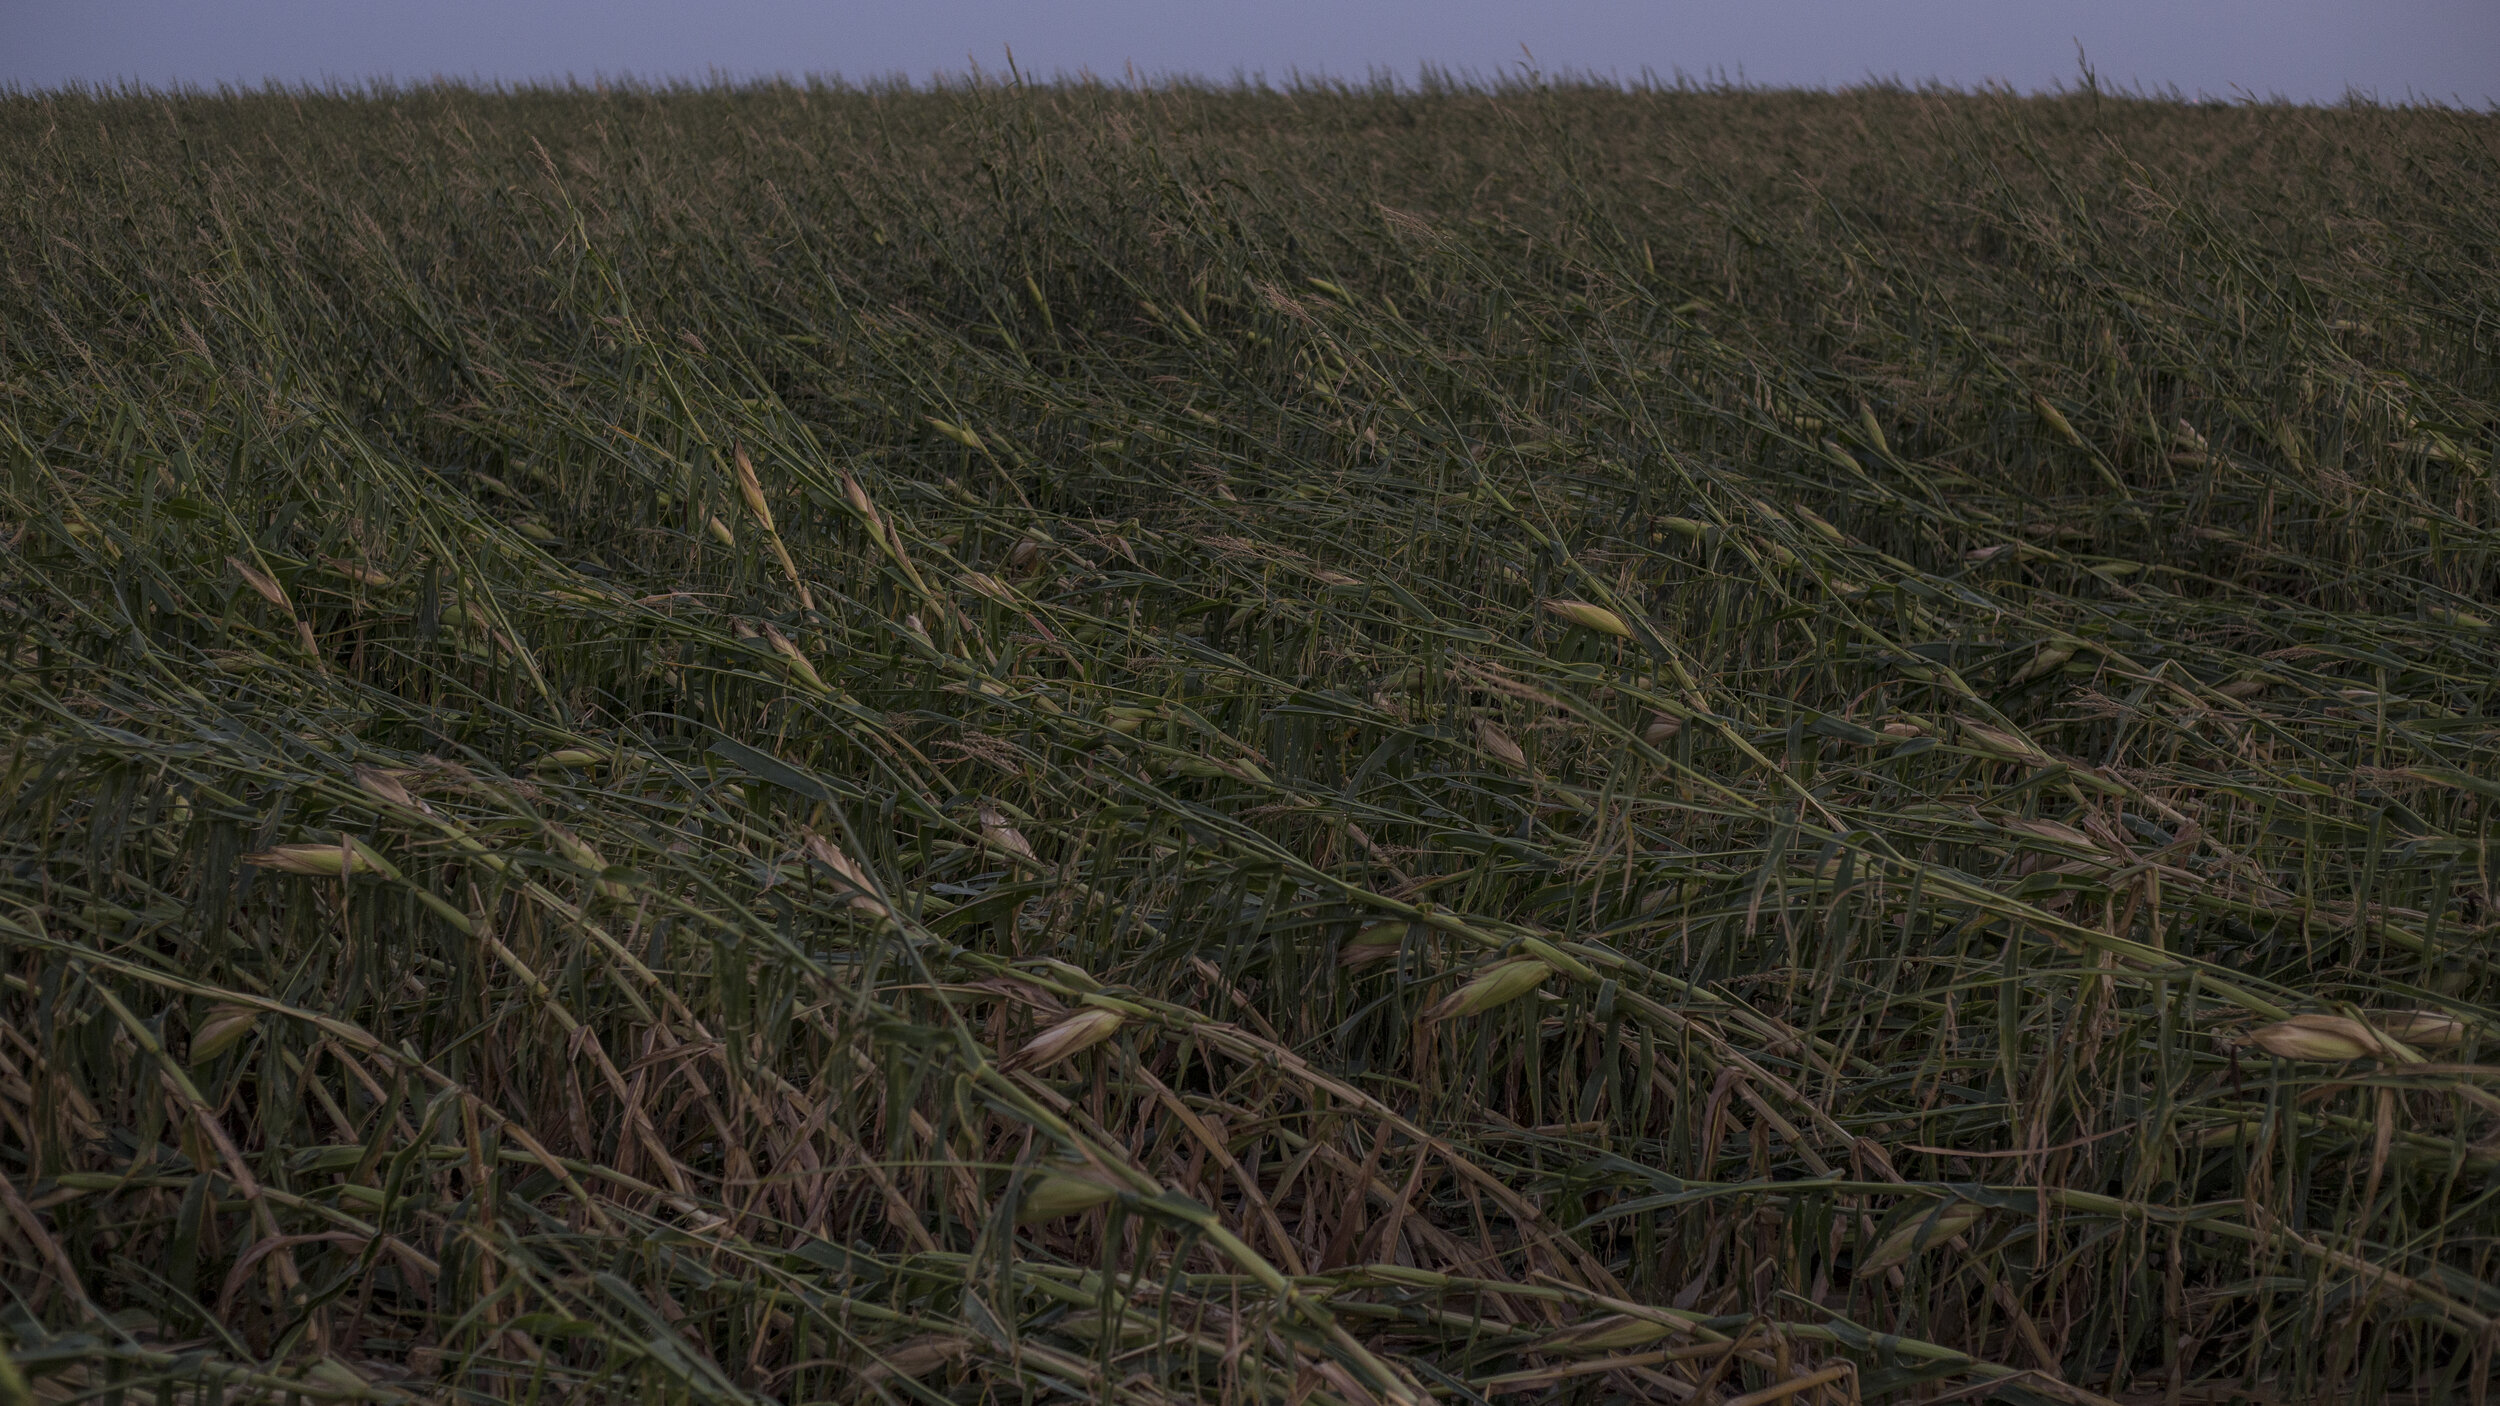  Rows of corn lay flattened at dusk weeks before harvest season in Fairfax, Iowa on Wednesday, August 26th, 2020. Although the full impact of crop yield from the derecho has not yet been determined, nearly 50% of Iowa’s cropland was impacted in some 